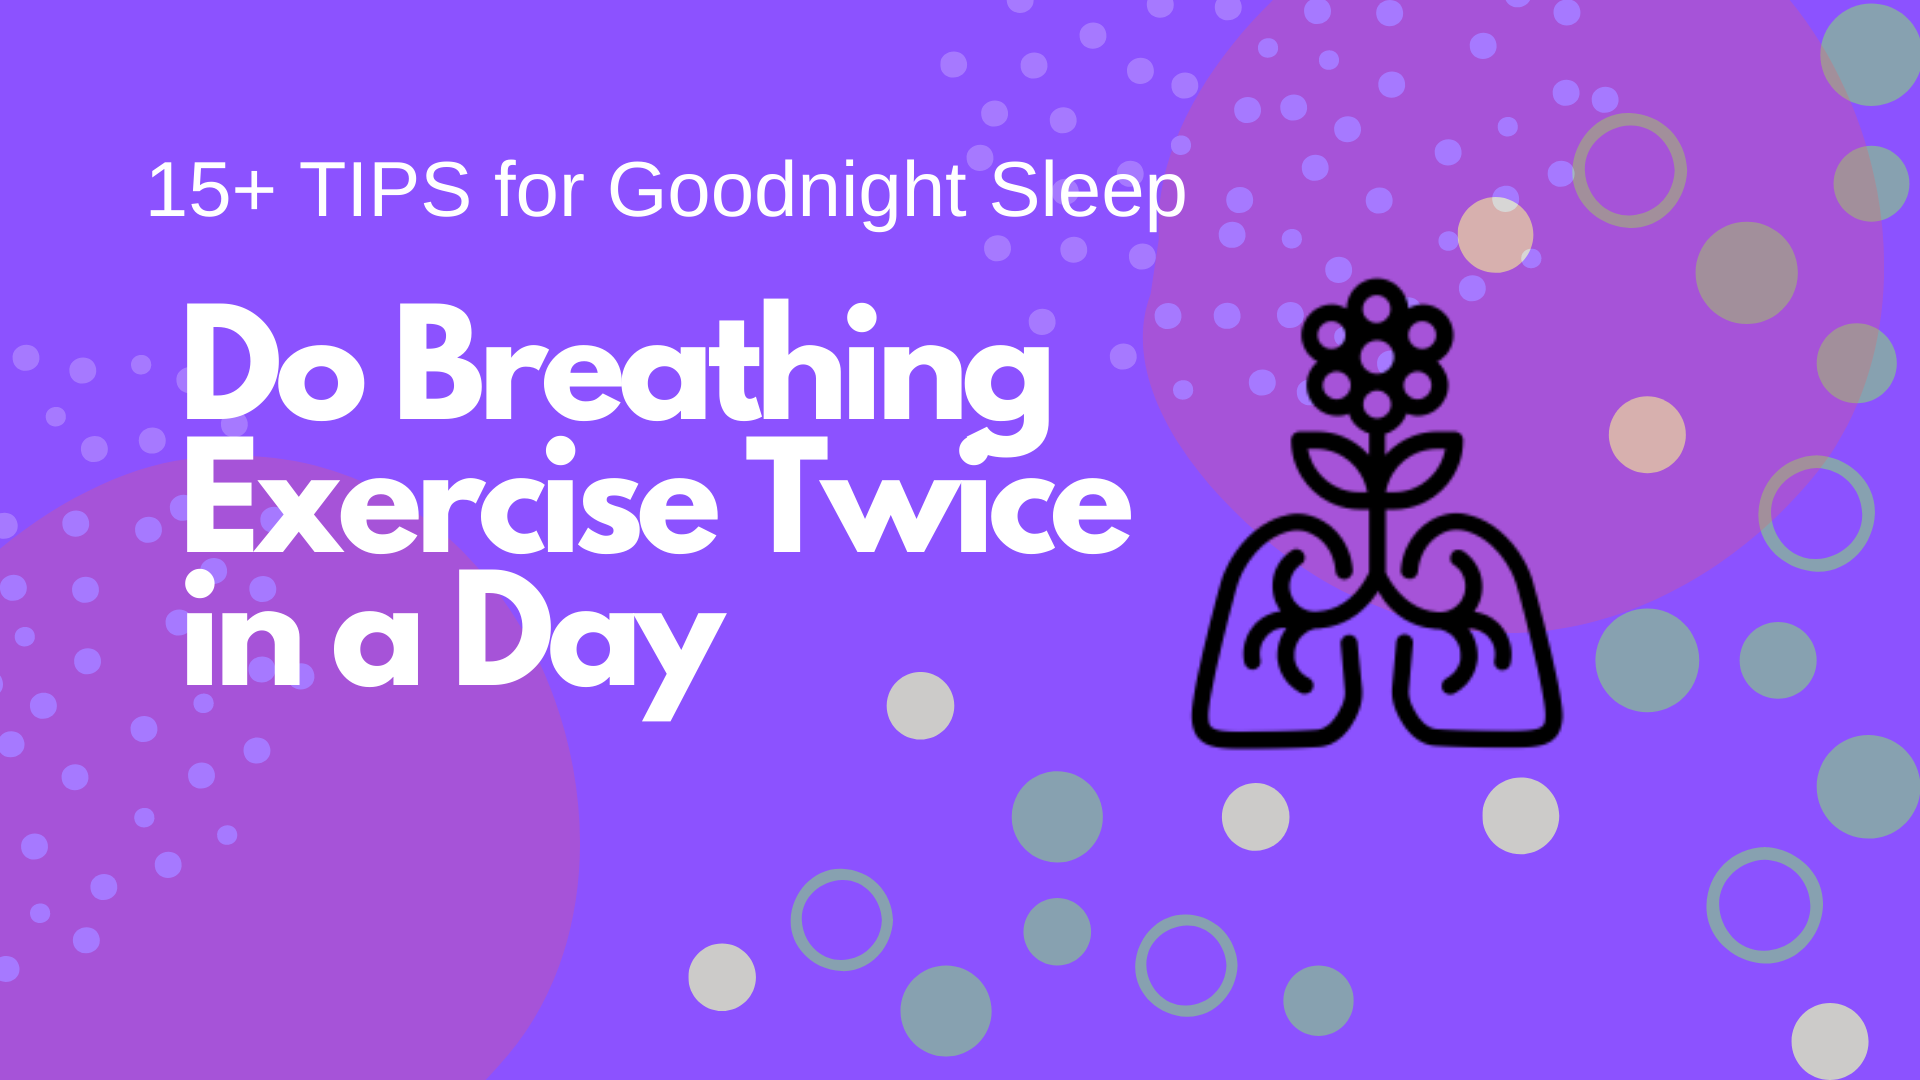 Do Breathing Exercise Twice in a Day